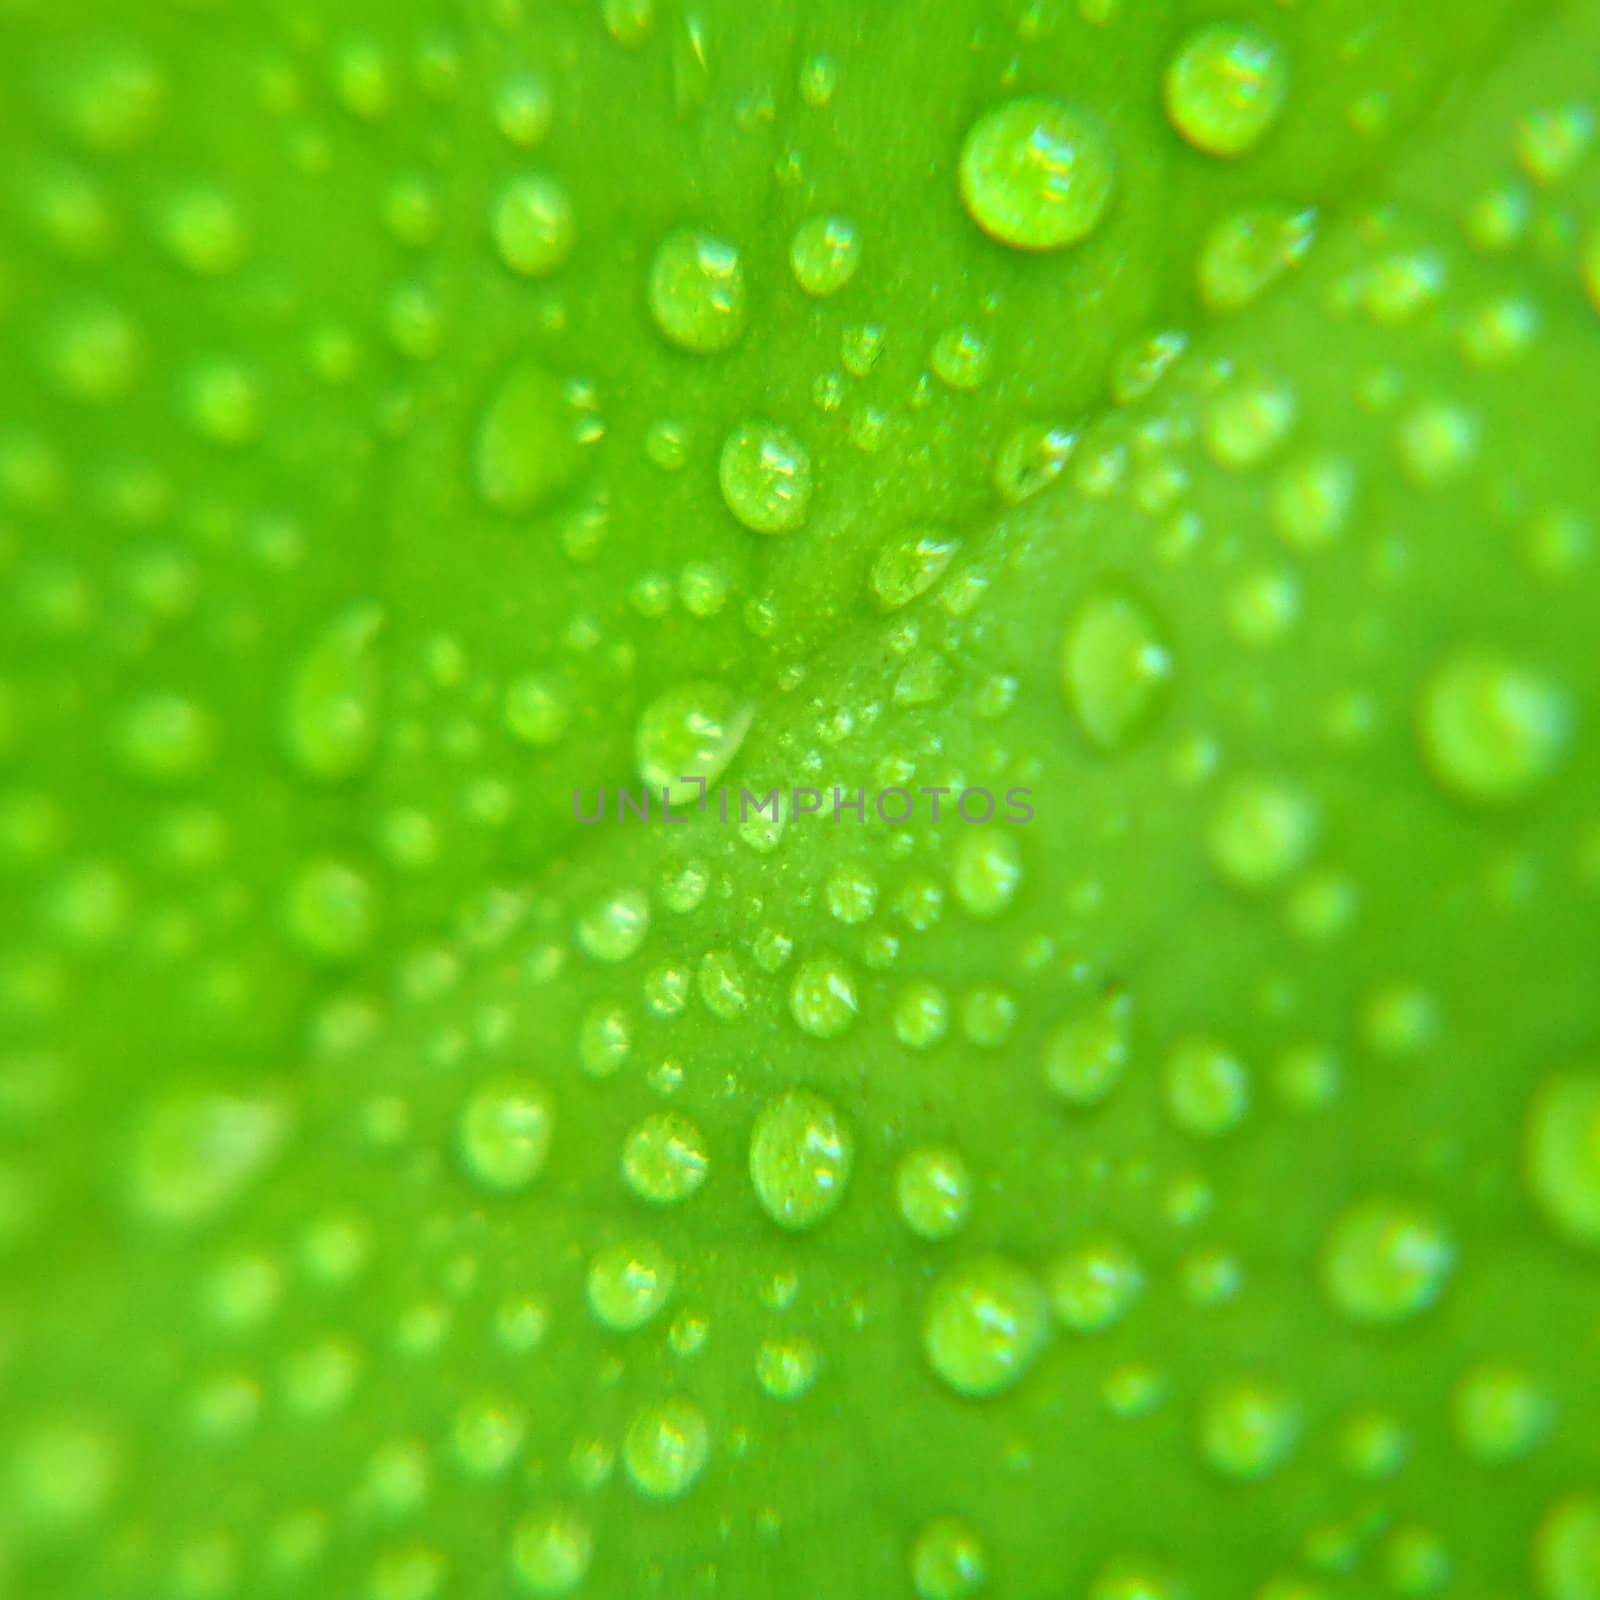 water drops on green leaf by anki21